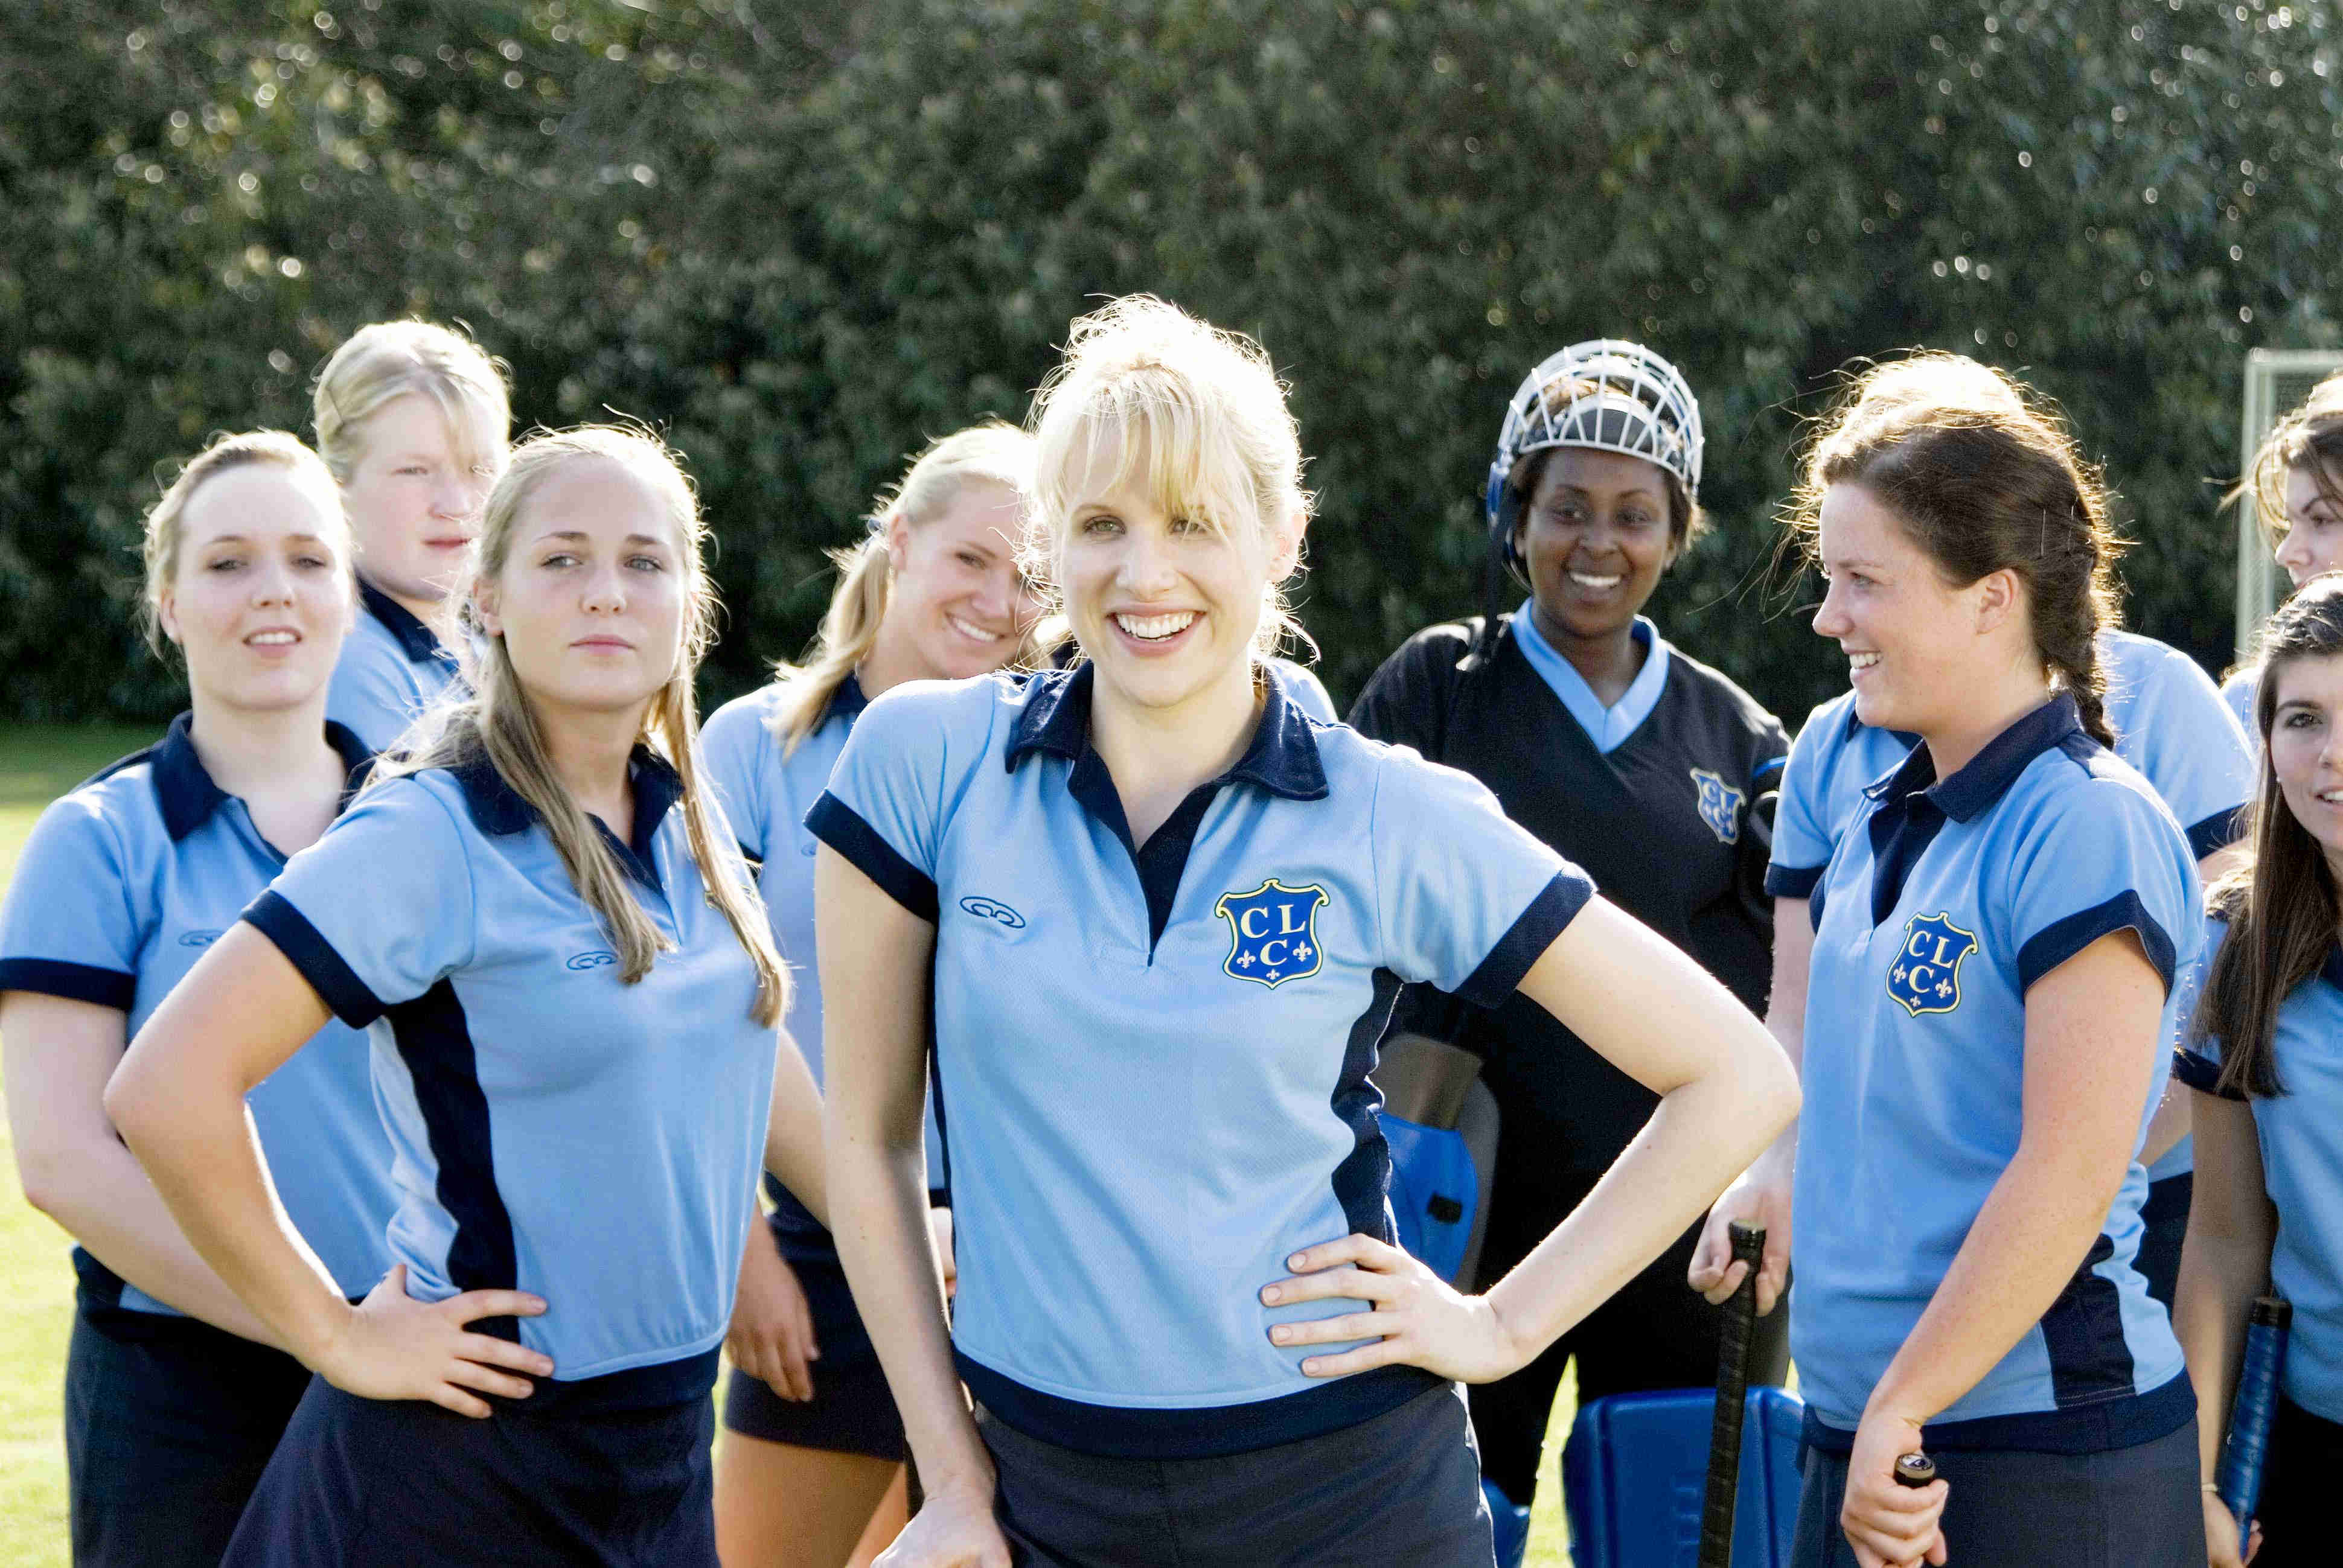 Lucy Punch stars as Verity Thwaites in NeoClassics Films' St. Trinian's (2009)